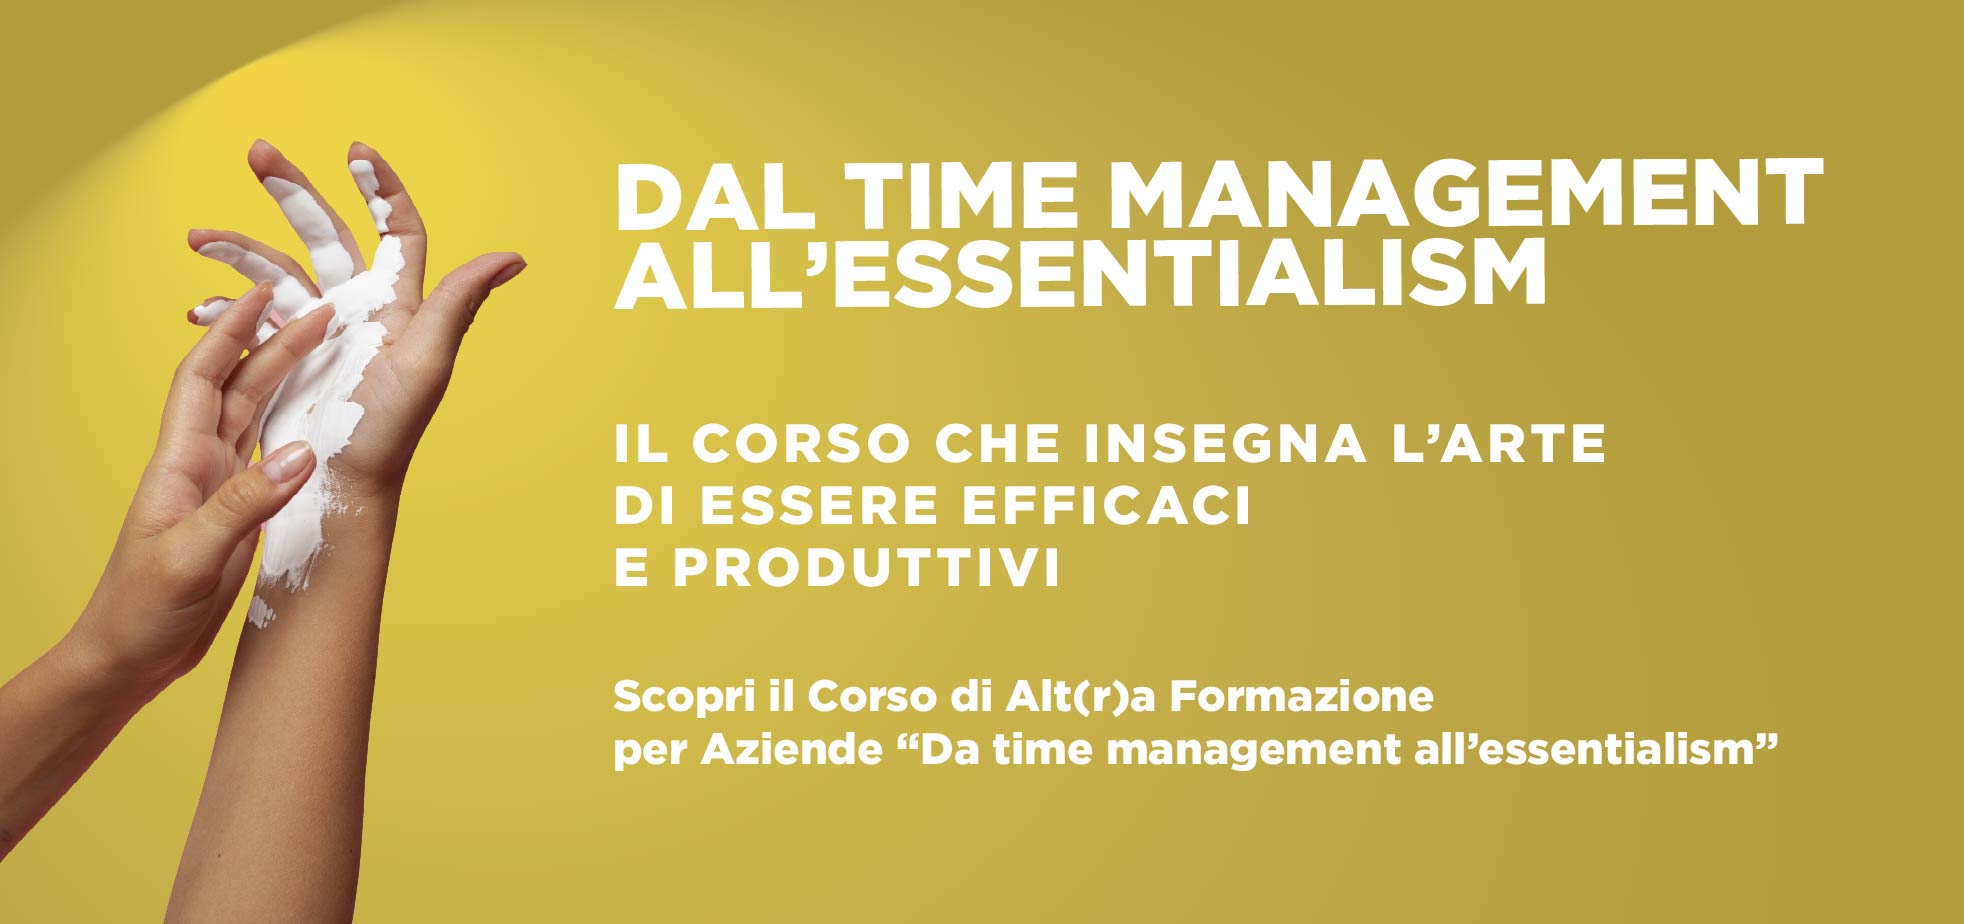 DAL TIME MANAGEMENT ALL‘ESSENTIALISM